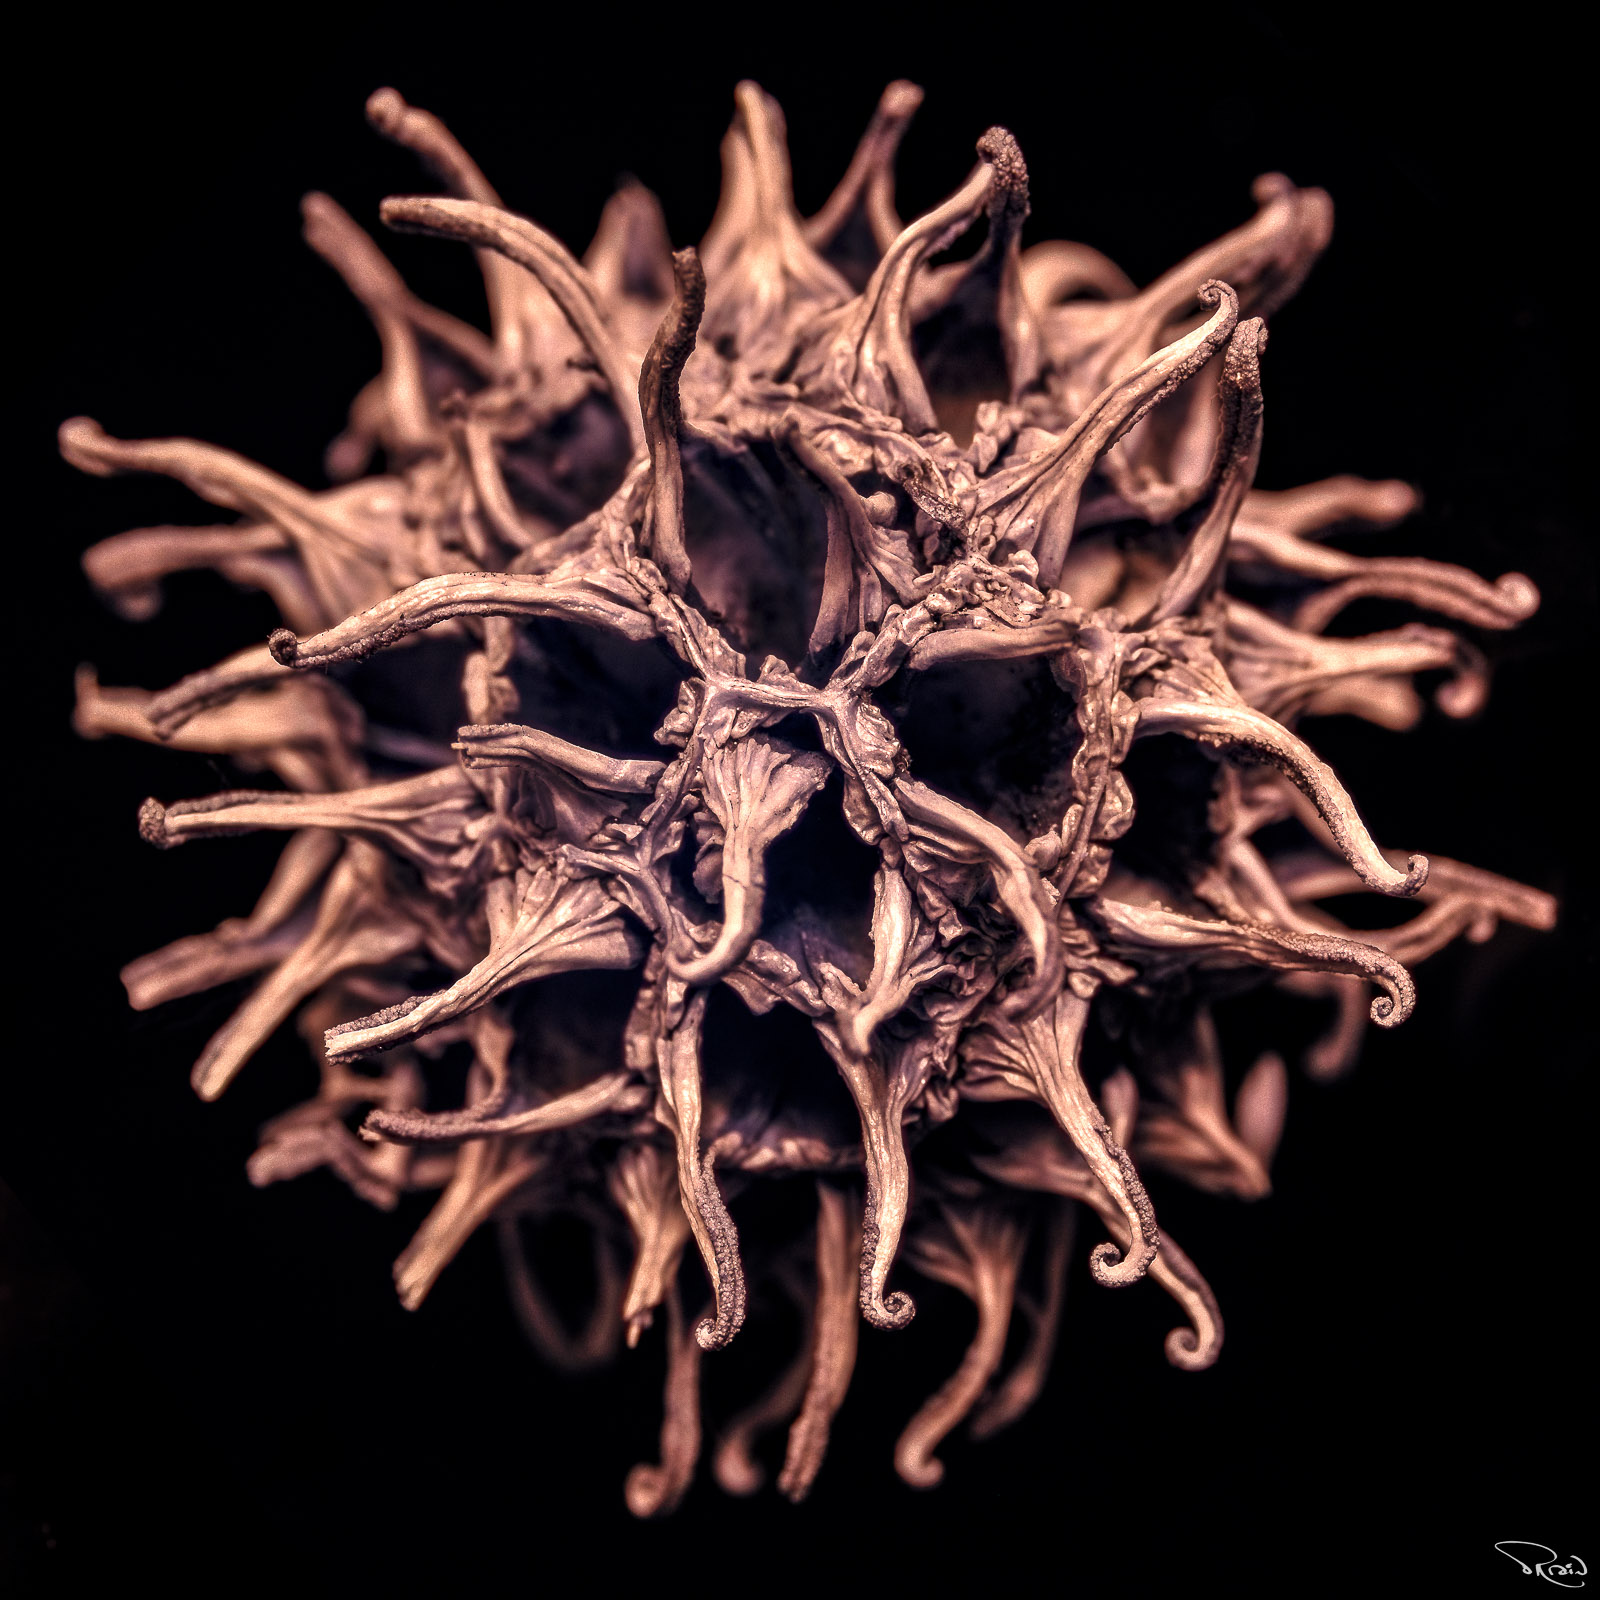 A very close up, detailed look at a sweetgum seed pod reveals tentacle-like spines and a network of open compartments. 